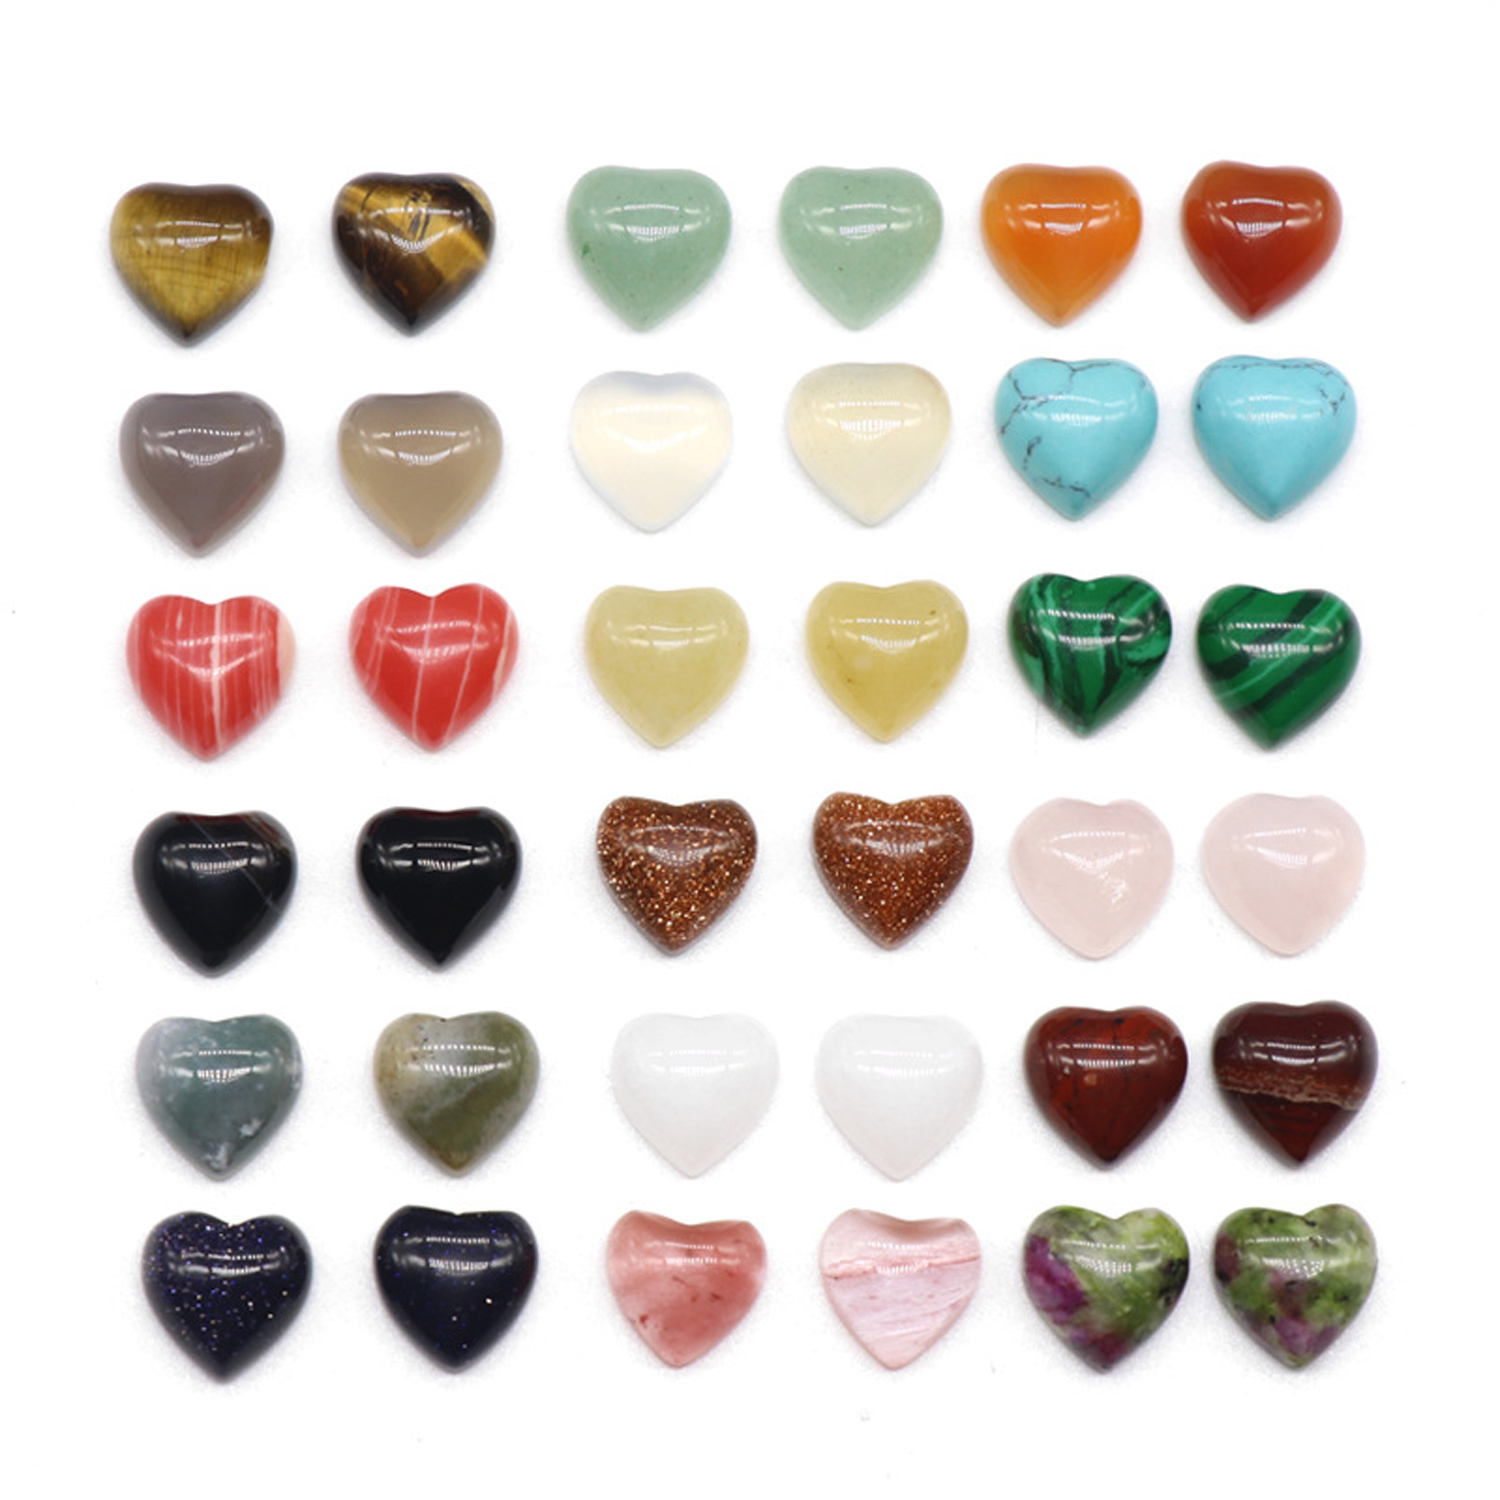 

Heart Stone Cabochon Love Chakra Beads Gemstone Healing 20pcs 10mm Crystal Stones many Colors Wholesale for Jewelry making